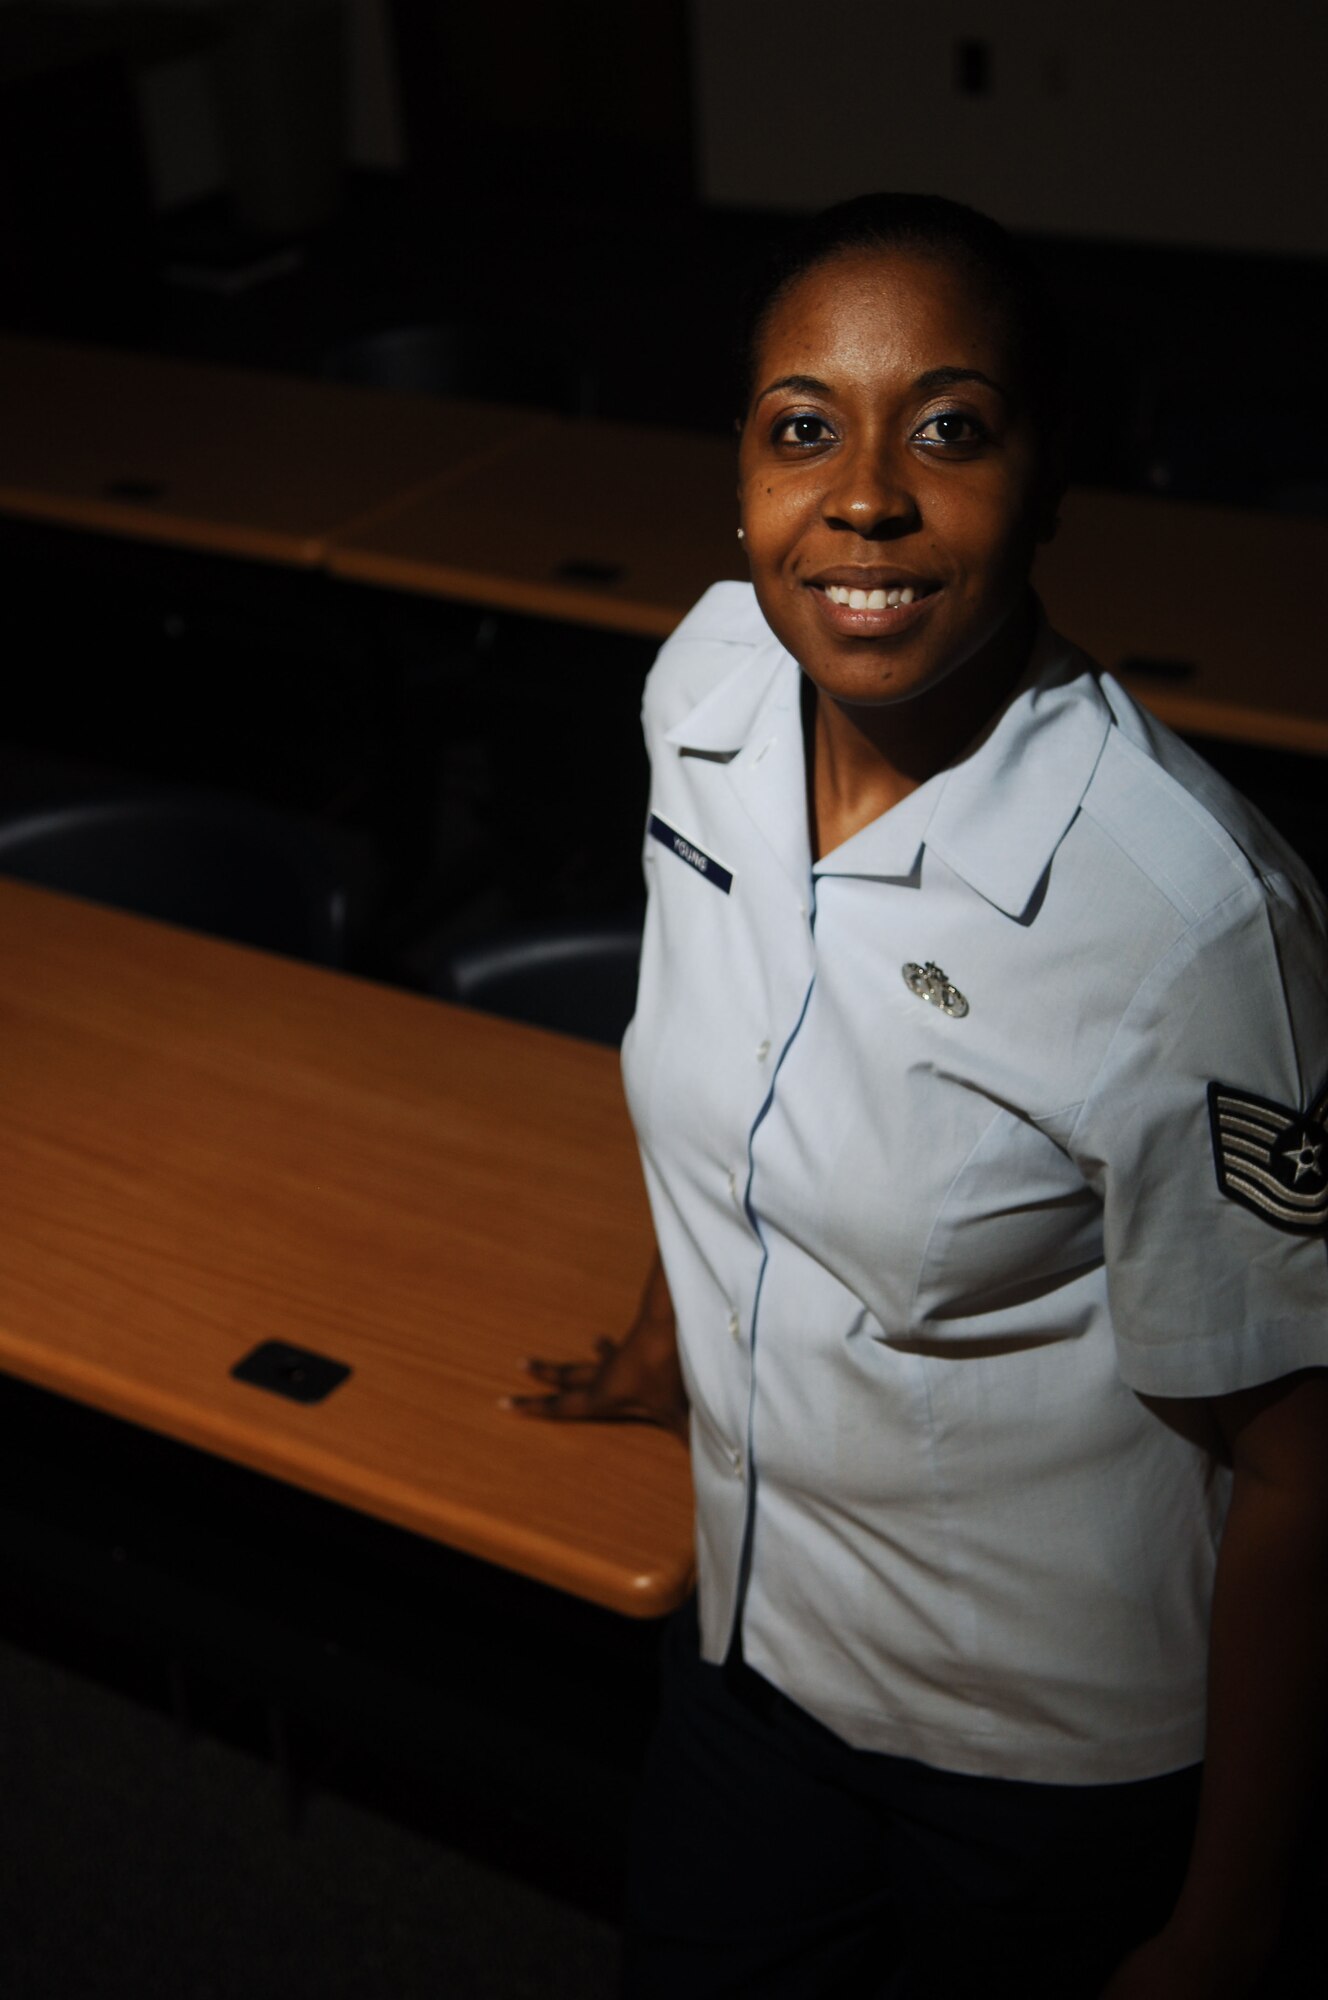 Tech Sgt. Kimberly Young, 633rd Air Base Wing Safety noncommissioned officer in charge, poses for a photo at Langley Air Force Base, Va., Nov. 19, 2012.  Although Young has won numerous awards after being in safety just three years, she says the recognition is not a factor in why she loves teaching defensive driving. (U.S. Air Force photo by Staff Sgt. Katie Gar Ward / Released)